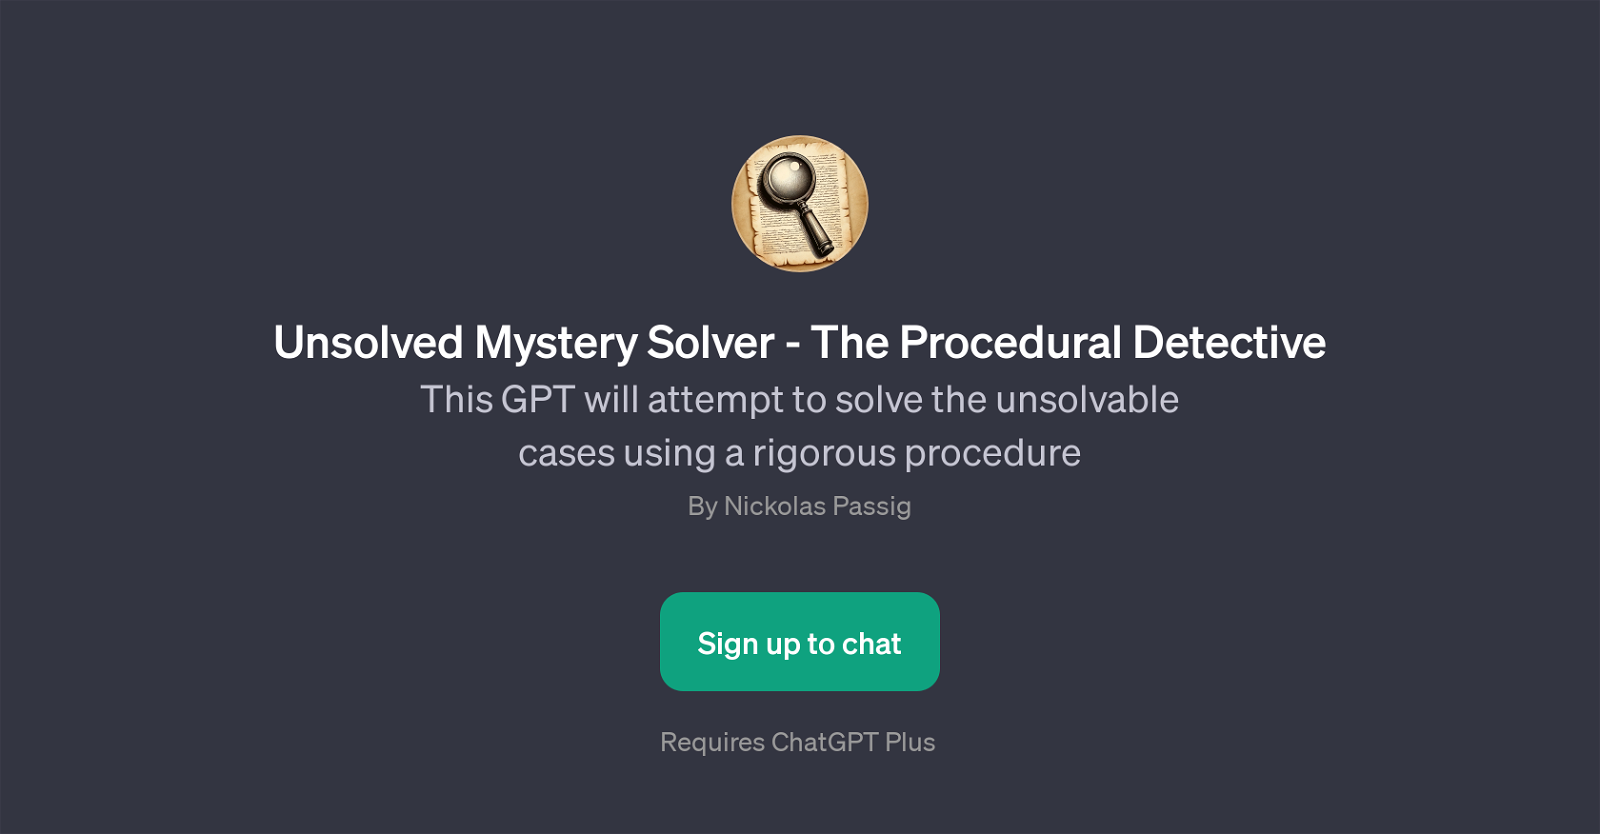 Unsolved Mystery Solver - The Procedural Detective website